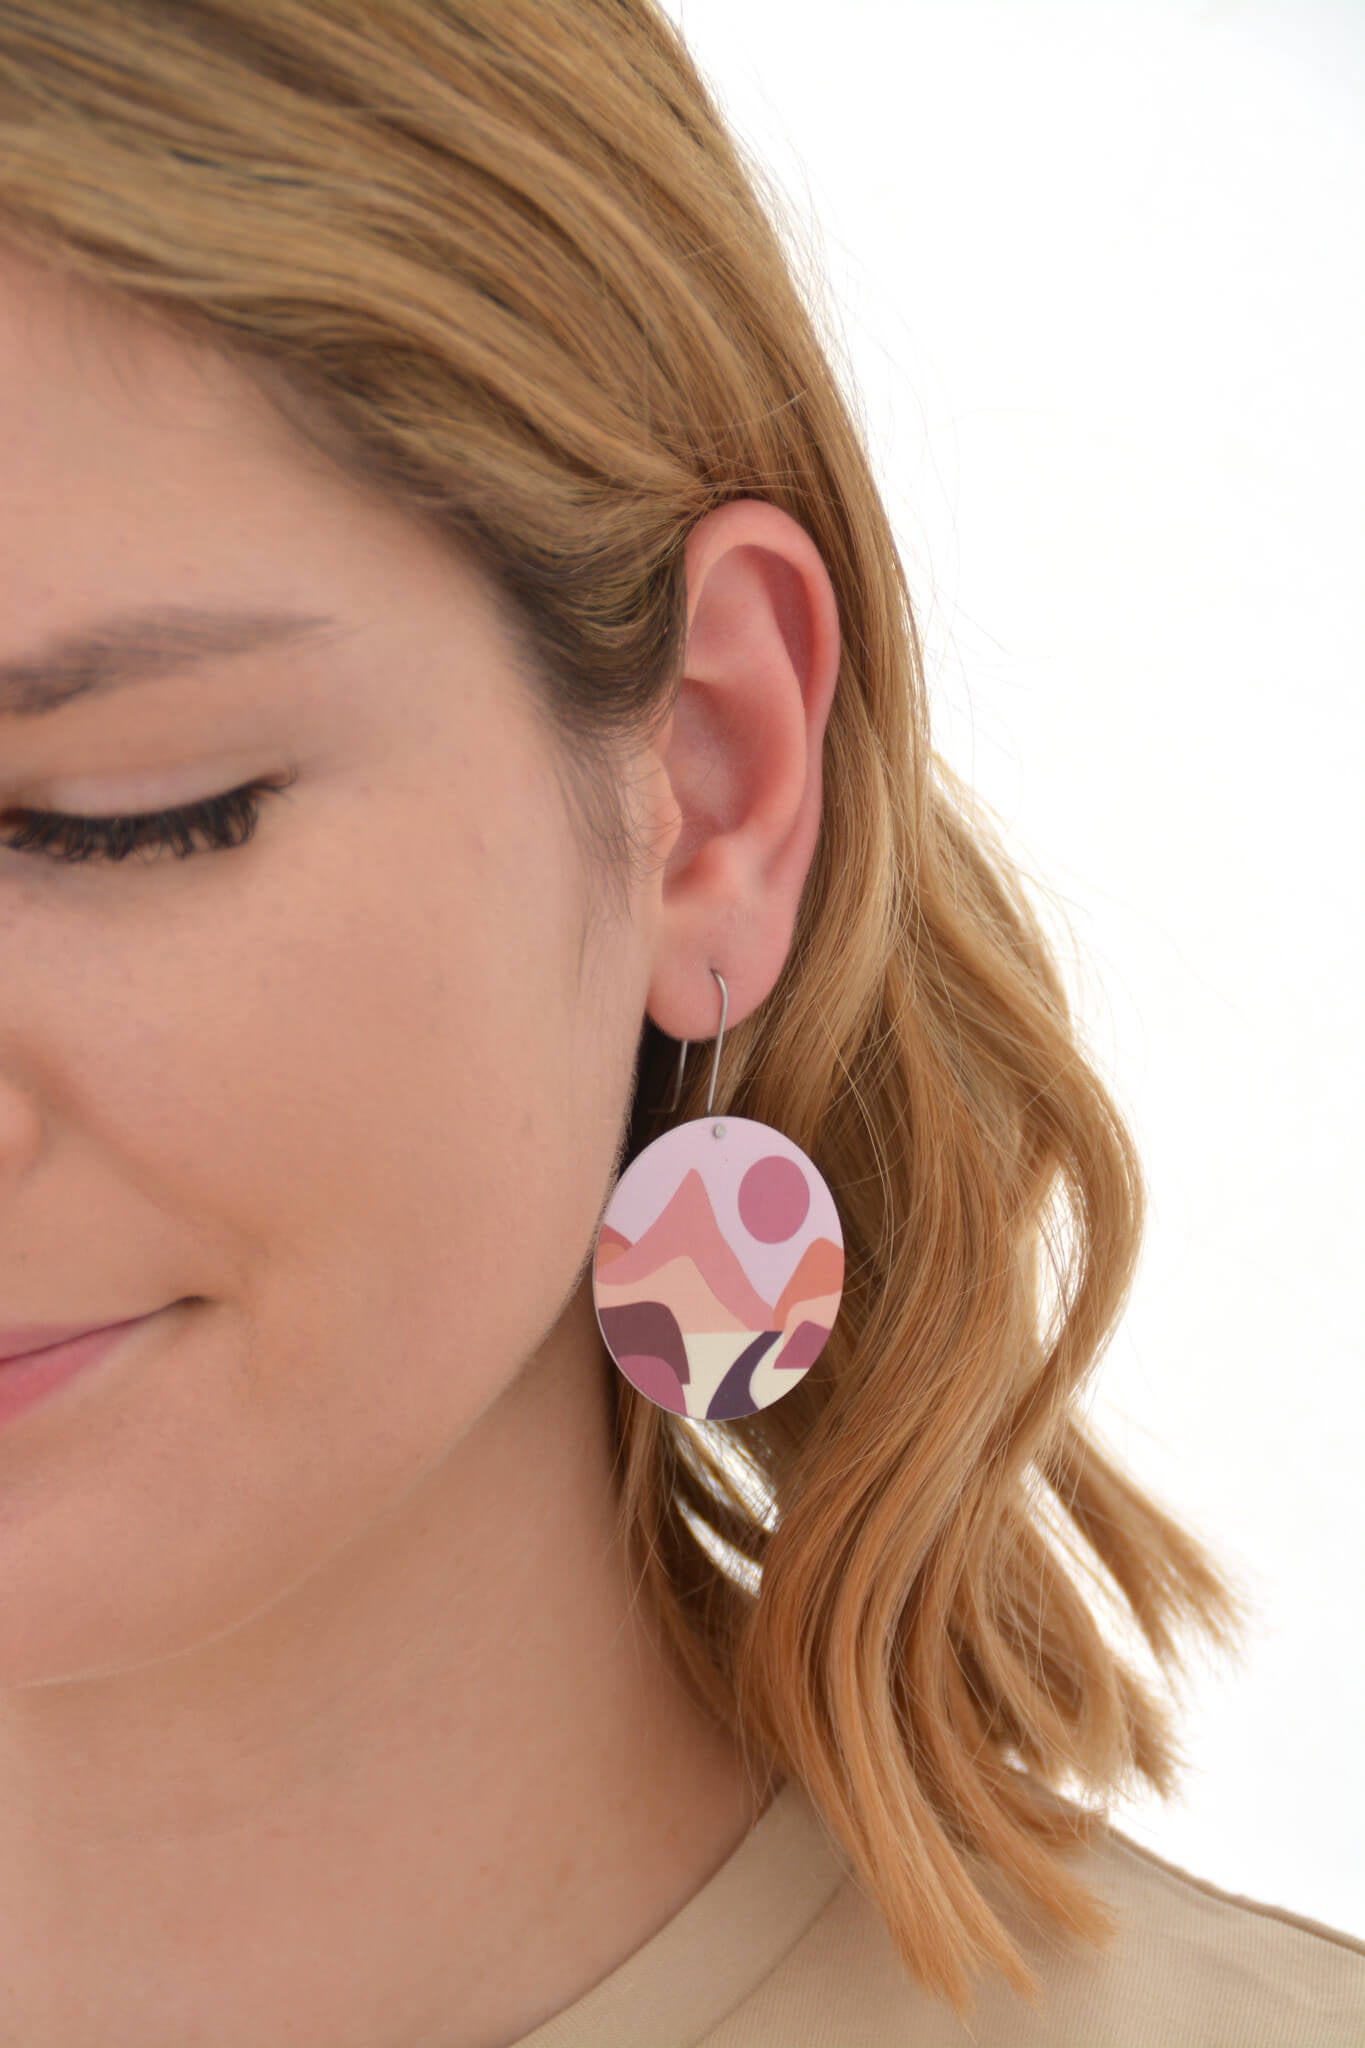 This is an image of a woman wearing a Kitty Came Home earring in her left ear. The flat circle is 36 millimetres in diameter and hangs from a shepherds hook. The design is lily of the valley by Satin and Tat. A terracotta coloured sinks in a pale pink sky towards a landscape of magenta, burgundy and pink hills. A path proceeds across the valley floor towards a cleft in the far mountain range.